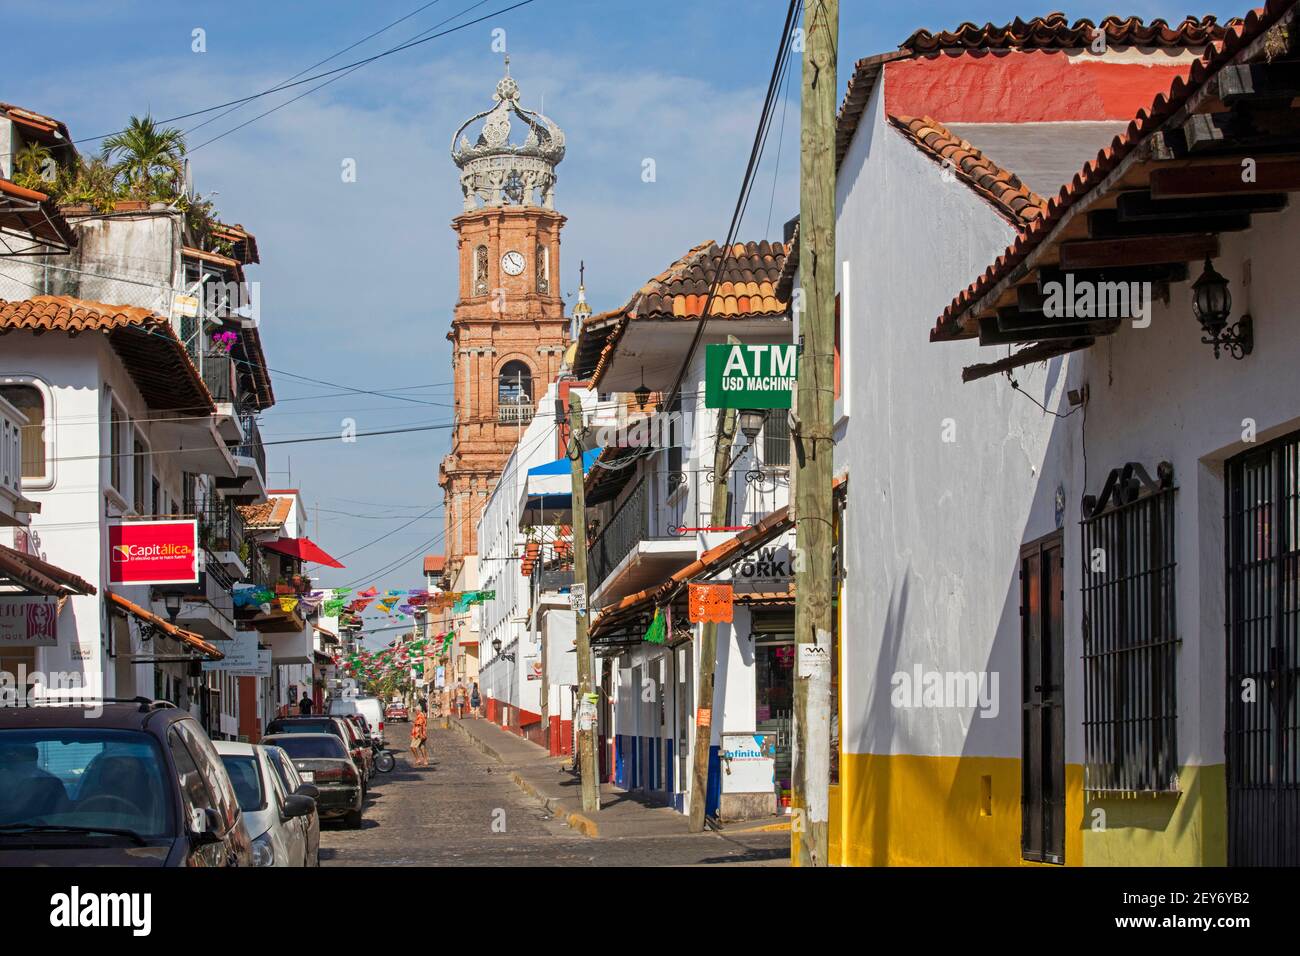 Street and Church of Our Lady of Guadalupe in the city Puerto Vallarta, Mexican beach resort on the Pacific Ocean's Bahía de Banderas, Jalisco, Mexico Stock Photo